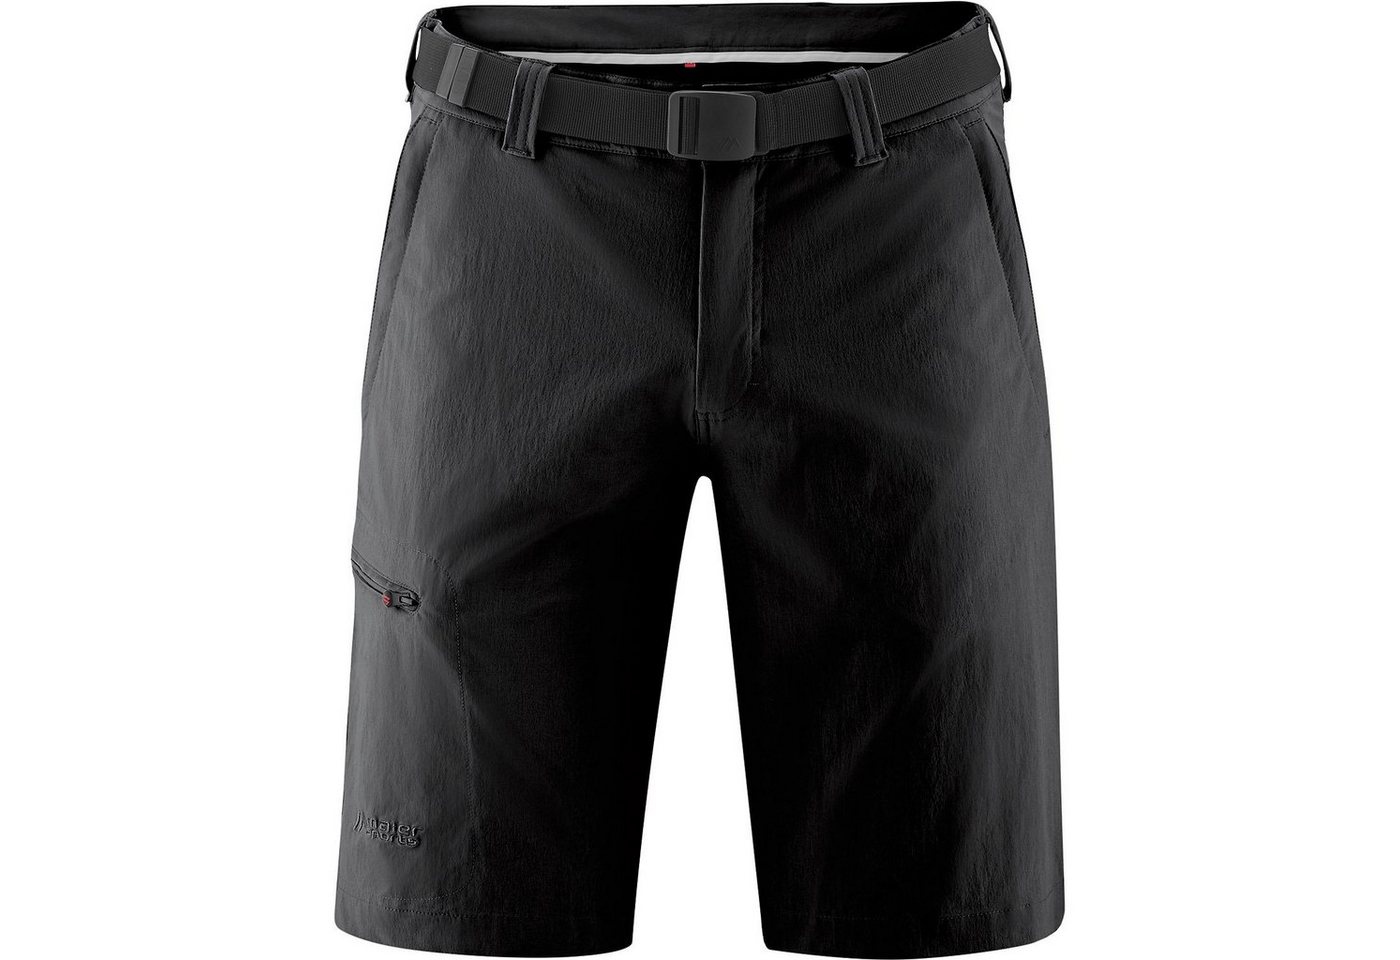 Maier Sports Funktionsshorts Wandershorts Huang von Maier Sports